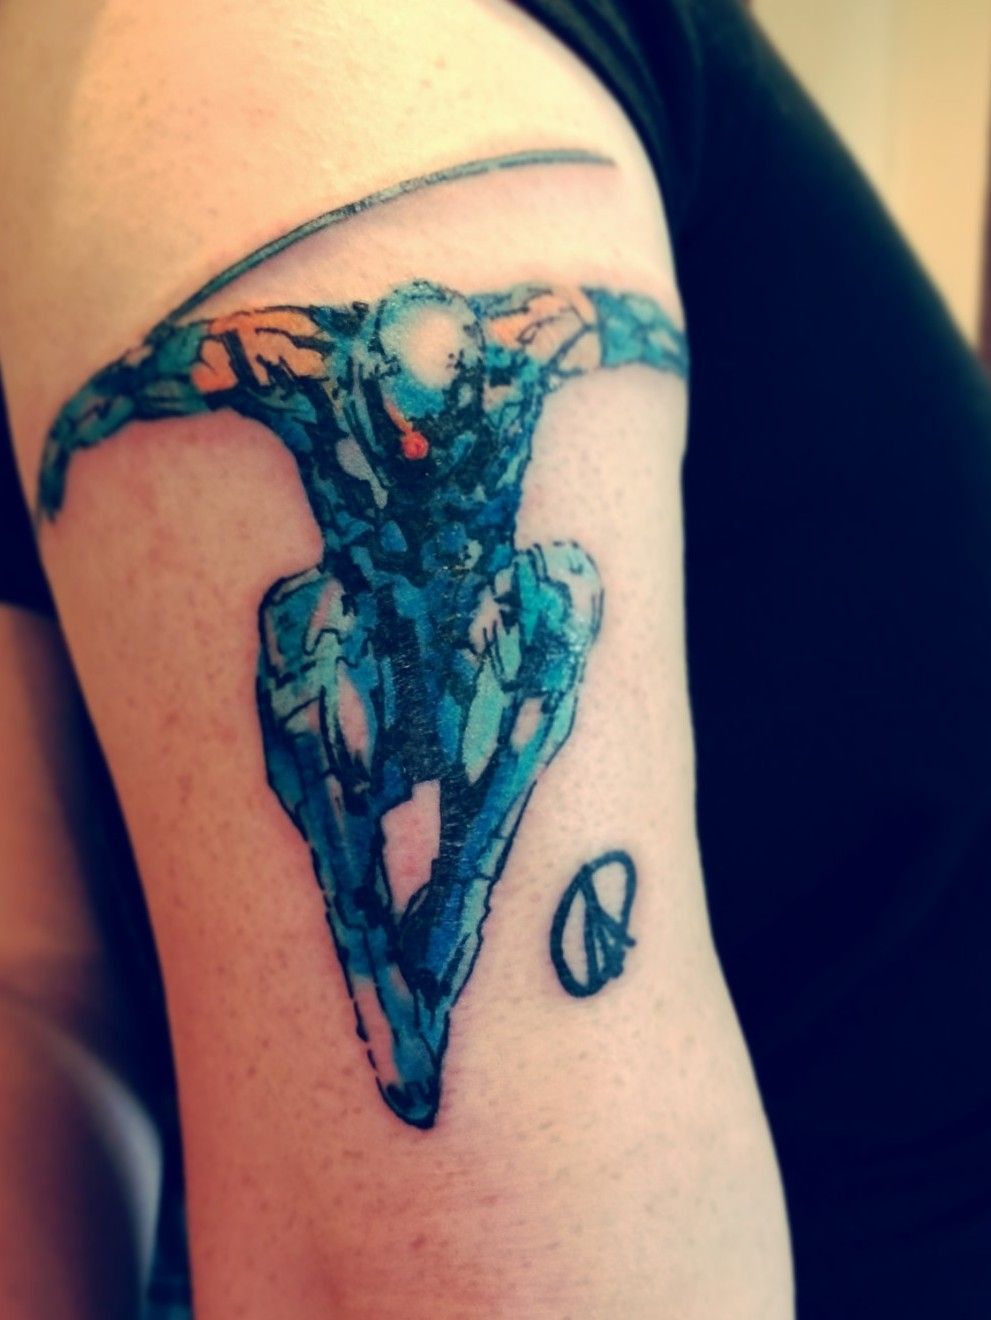 ApacheSmash DDG on Twitter Ive always wanted the Metal Gear Solid 2  Sons of Liberty cover as a tattoo One session took about 7 hours Heres  to the greatest video game ever